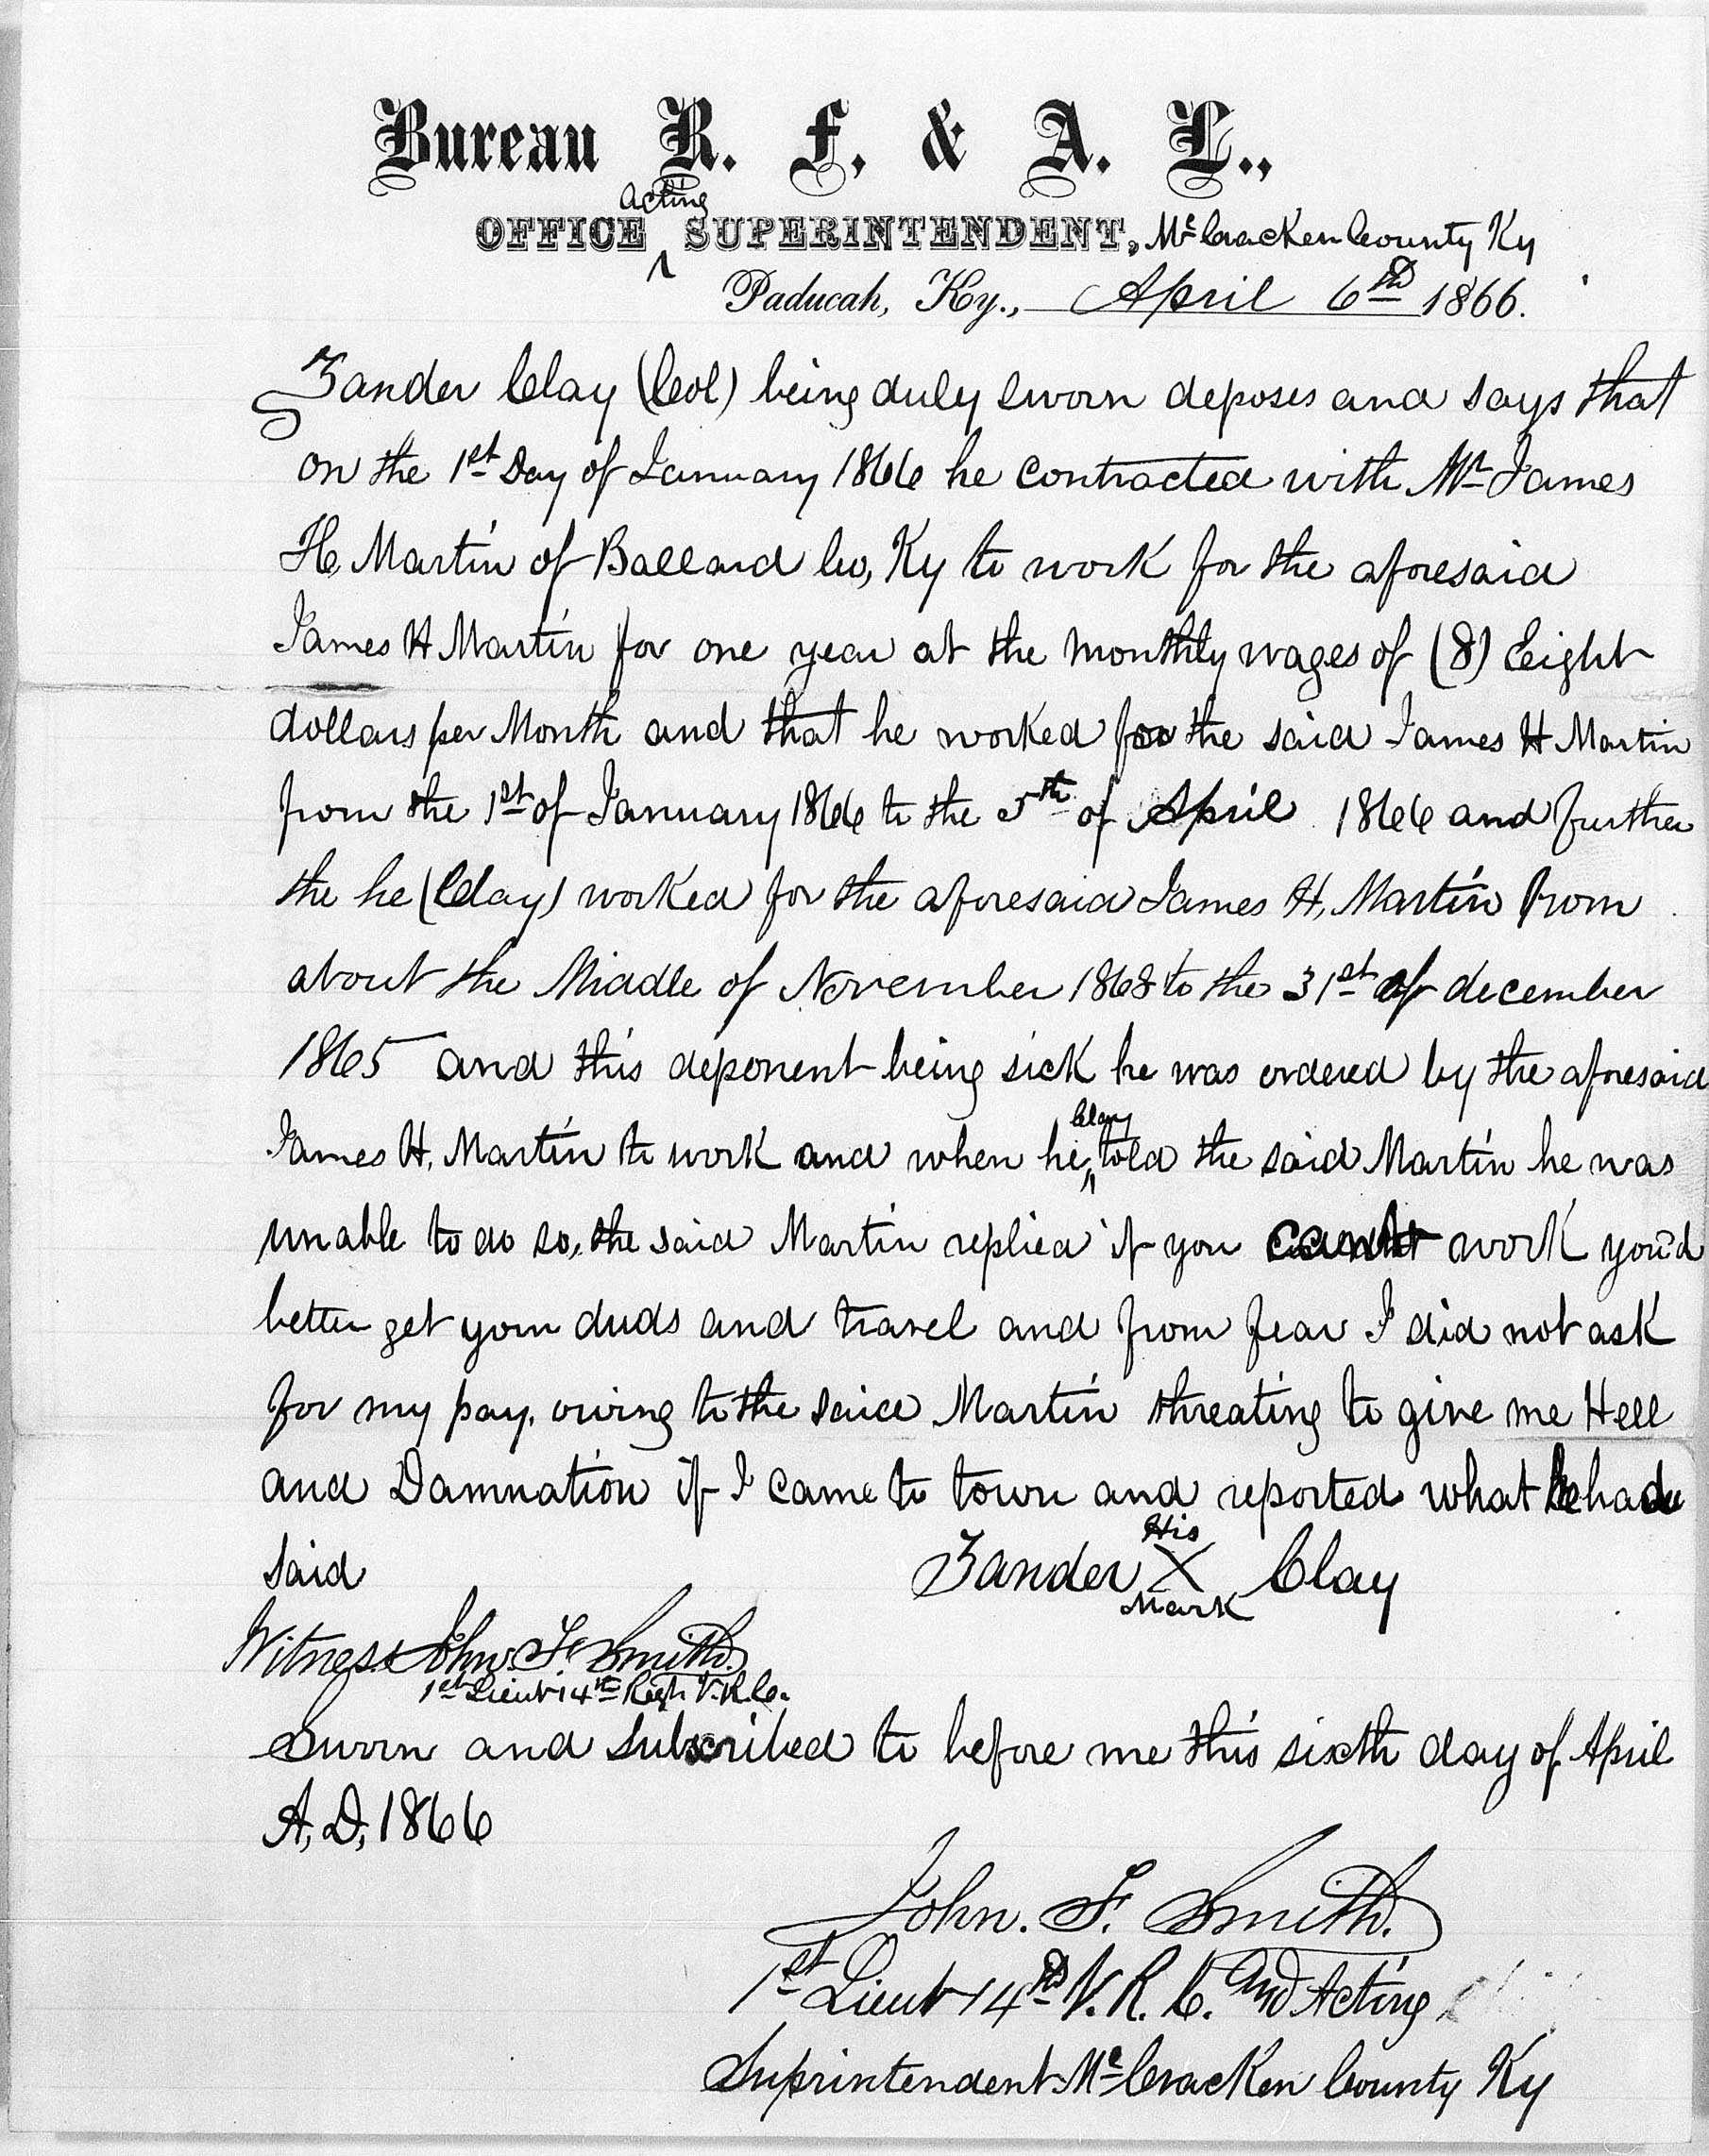 A fully page of handwritten affidavit of Zander Clay. It is signed at the bottom.